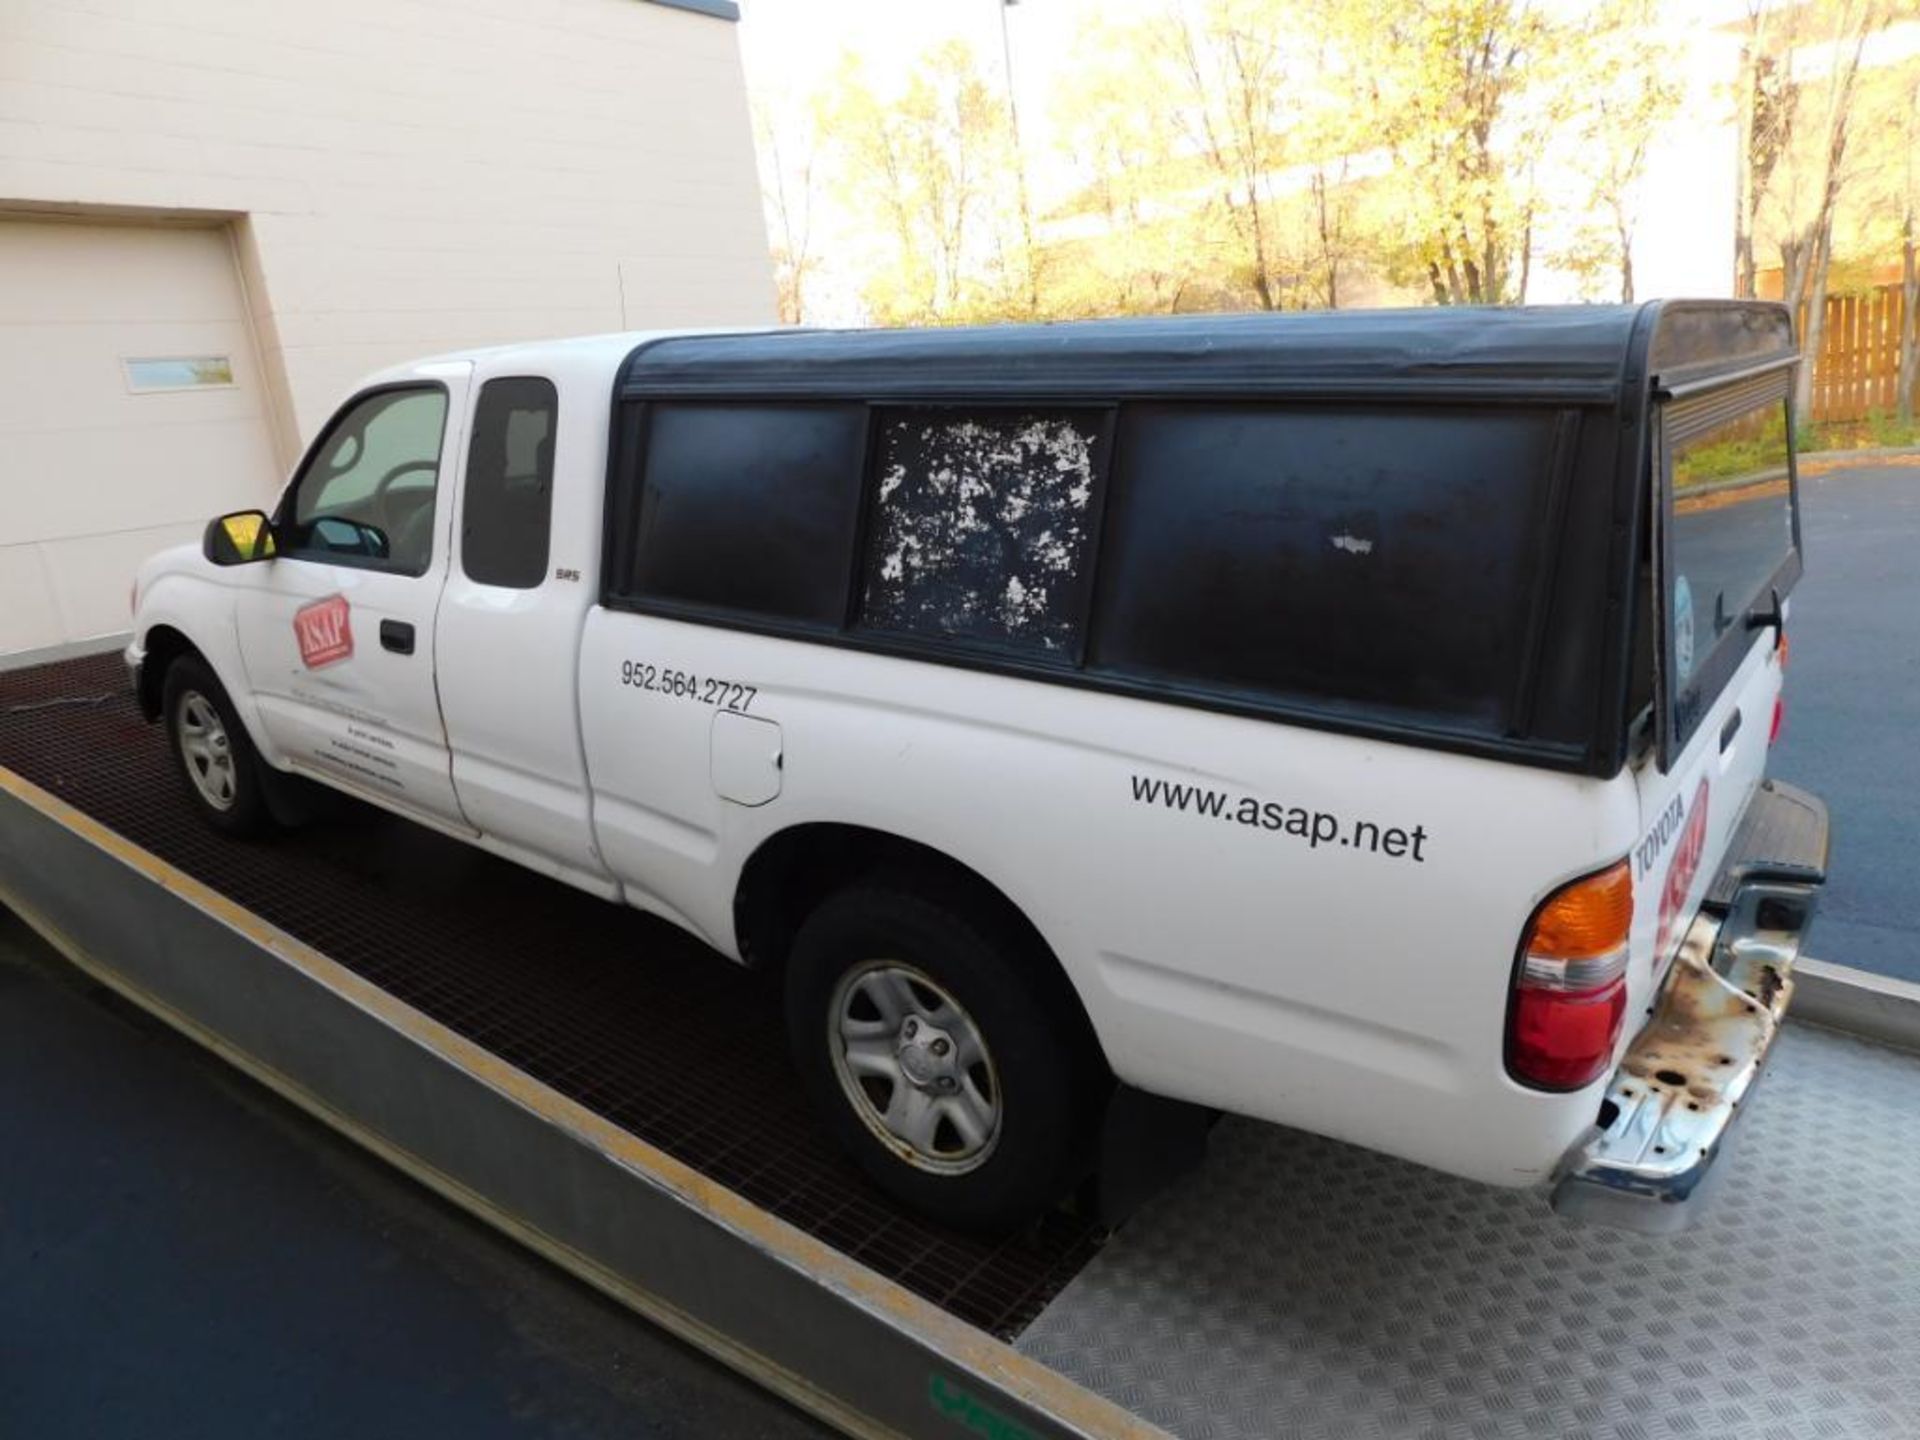 Toyota Pick Up Truck, VIN # TEVL52N04Z453287 (LOCATED IN BLOOMINGTON, MN.) - Image 3 of 10